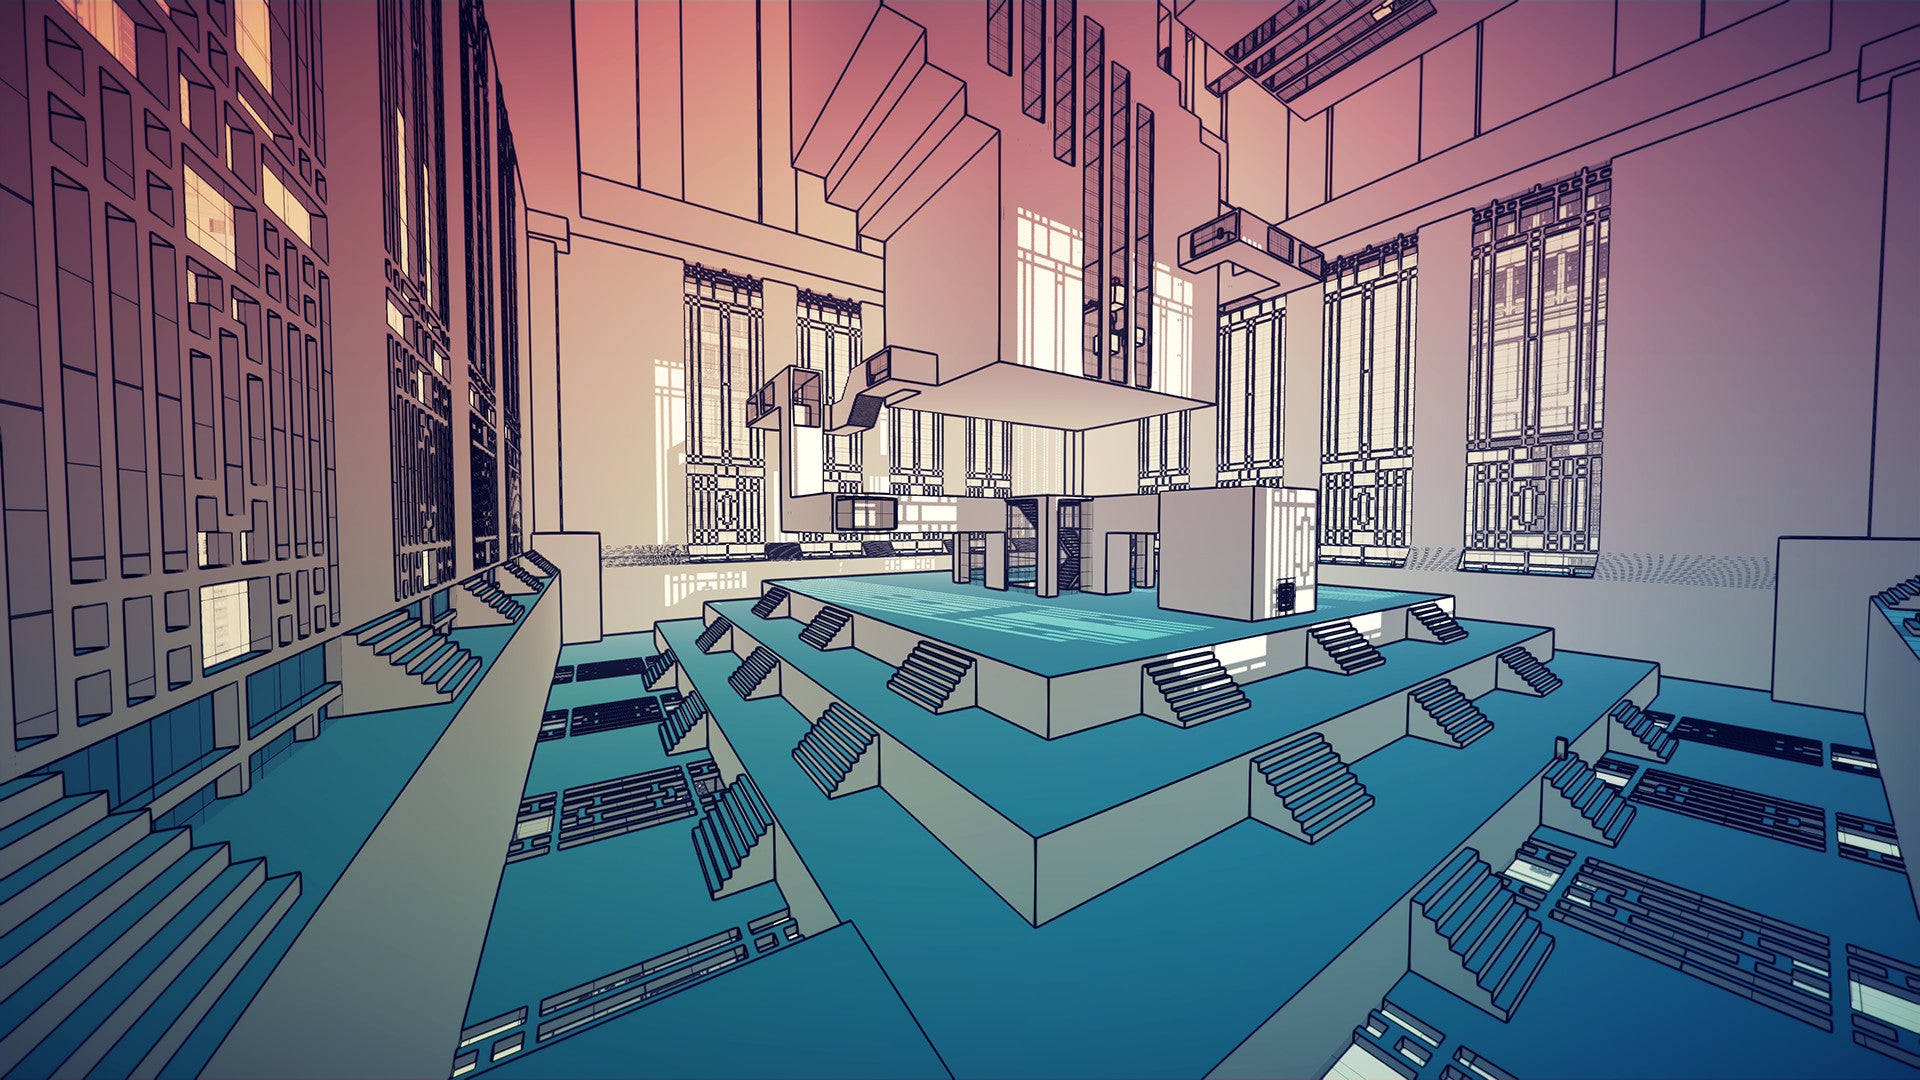 Manifold Garden Is A Puzzle Game About Infinity, No Big Deal